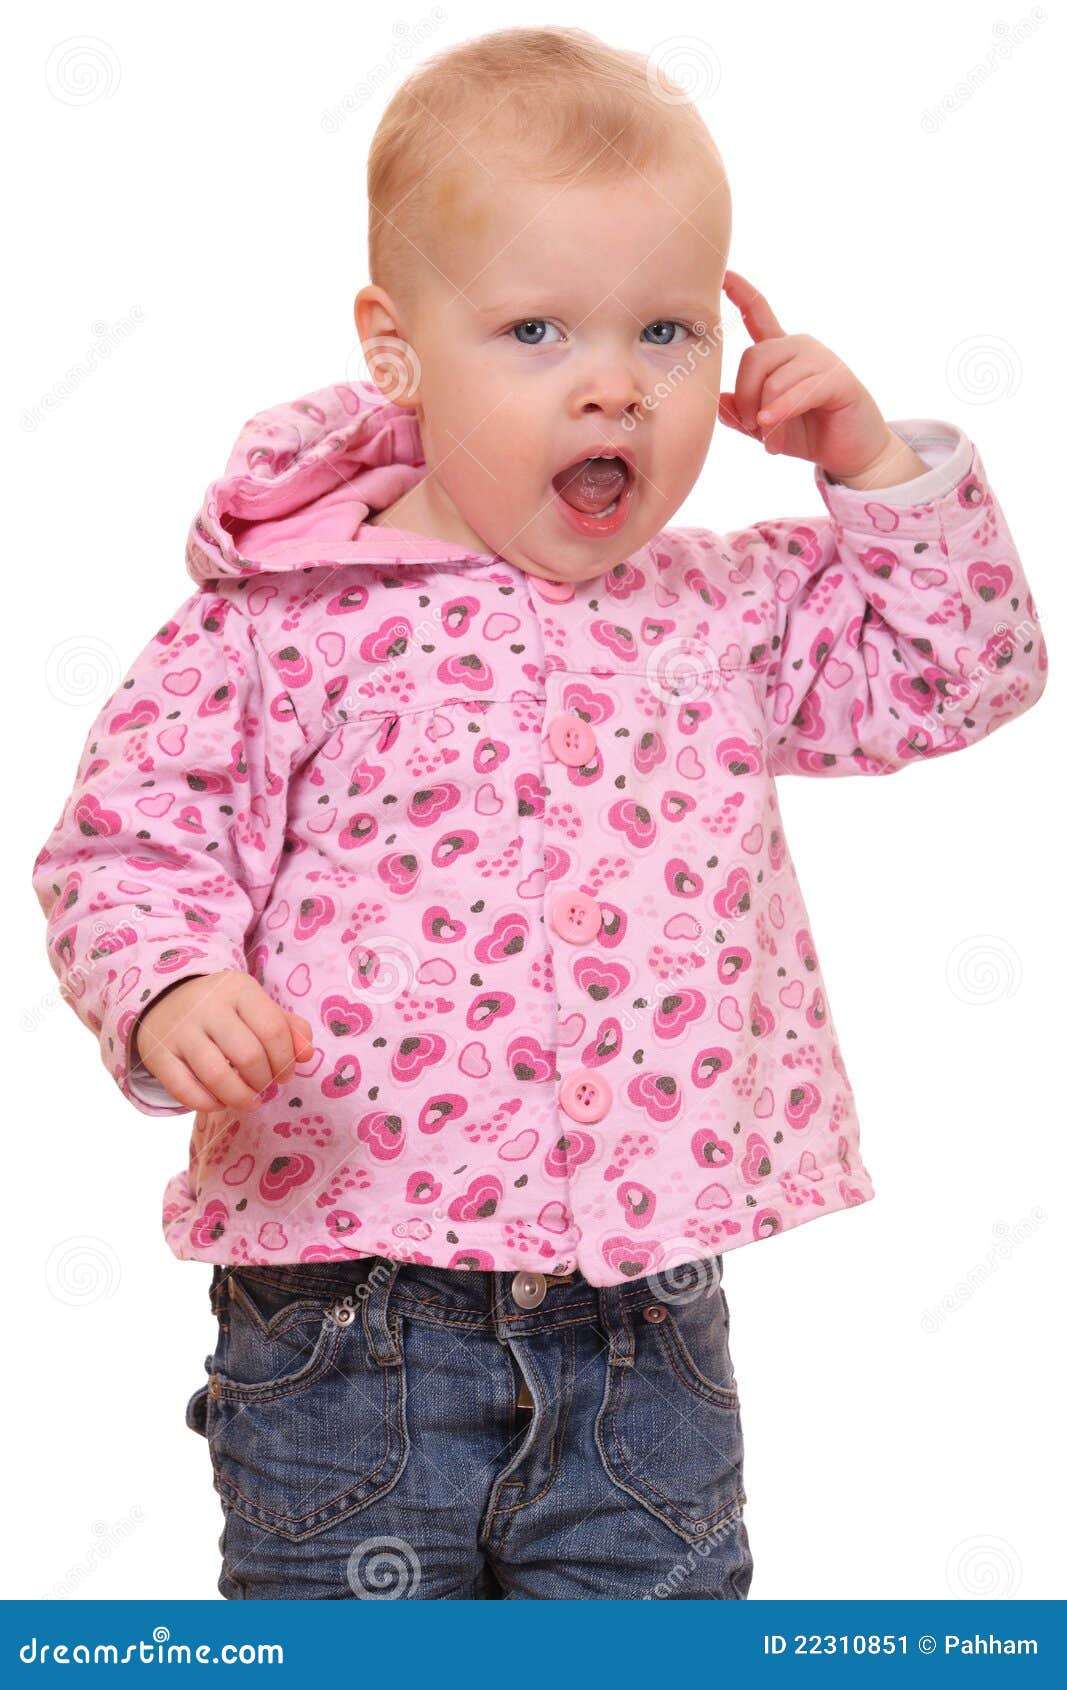 Angry toddler stock image. Image of female, hair, daughter - 22310851